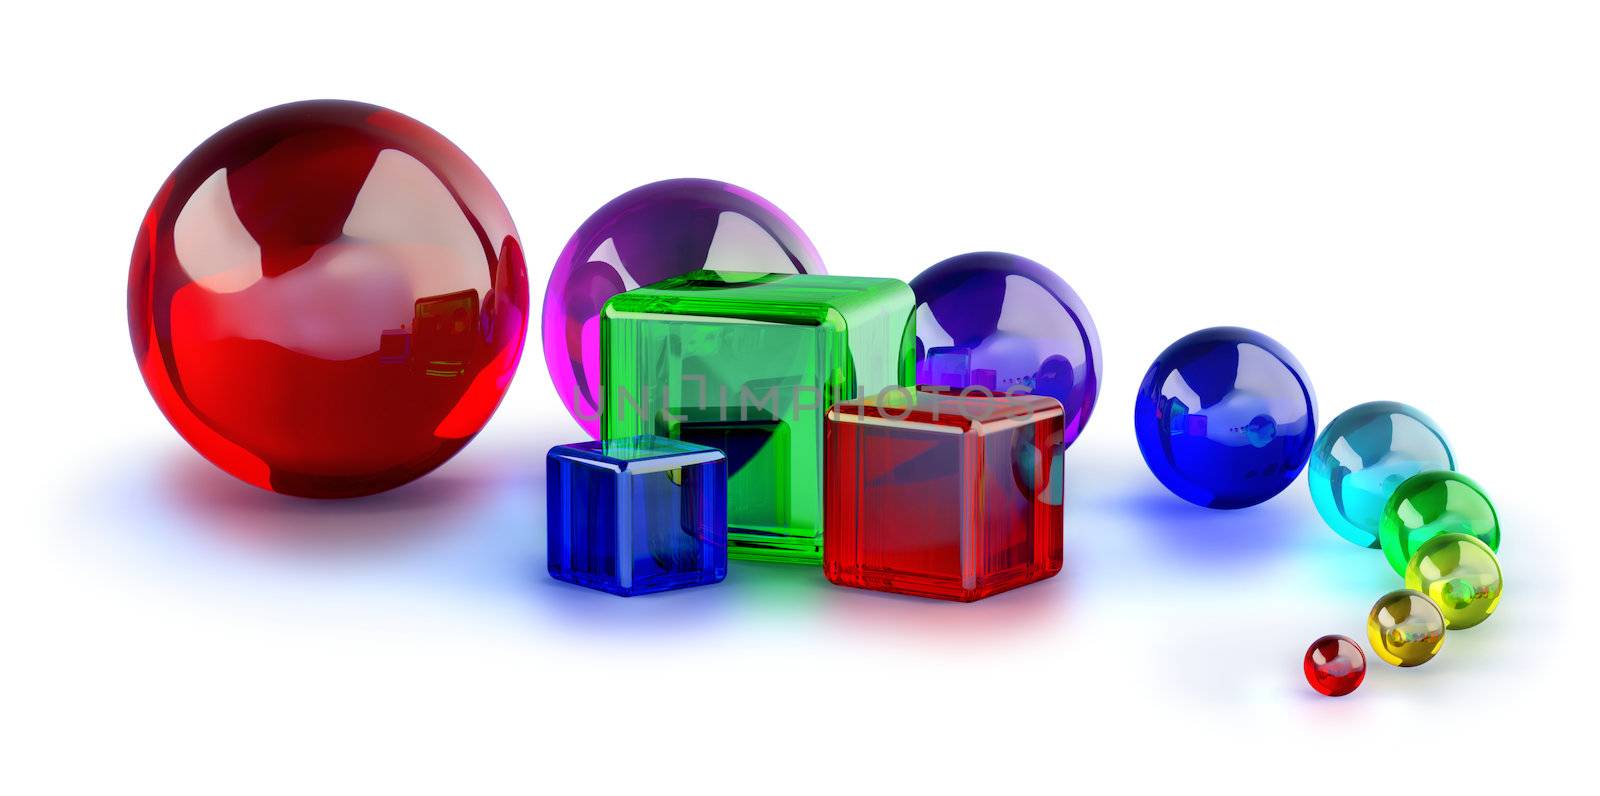 red, blue and green glass cubes and colorful marble balls